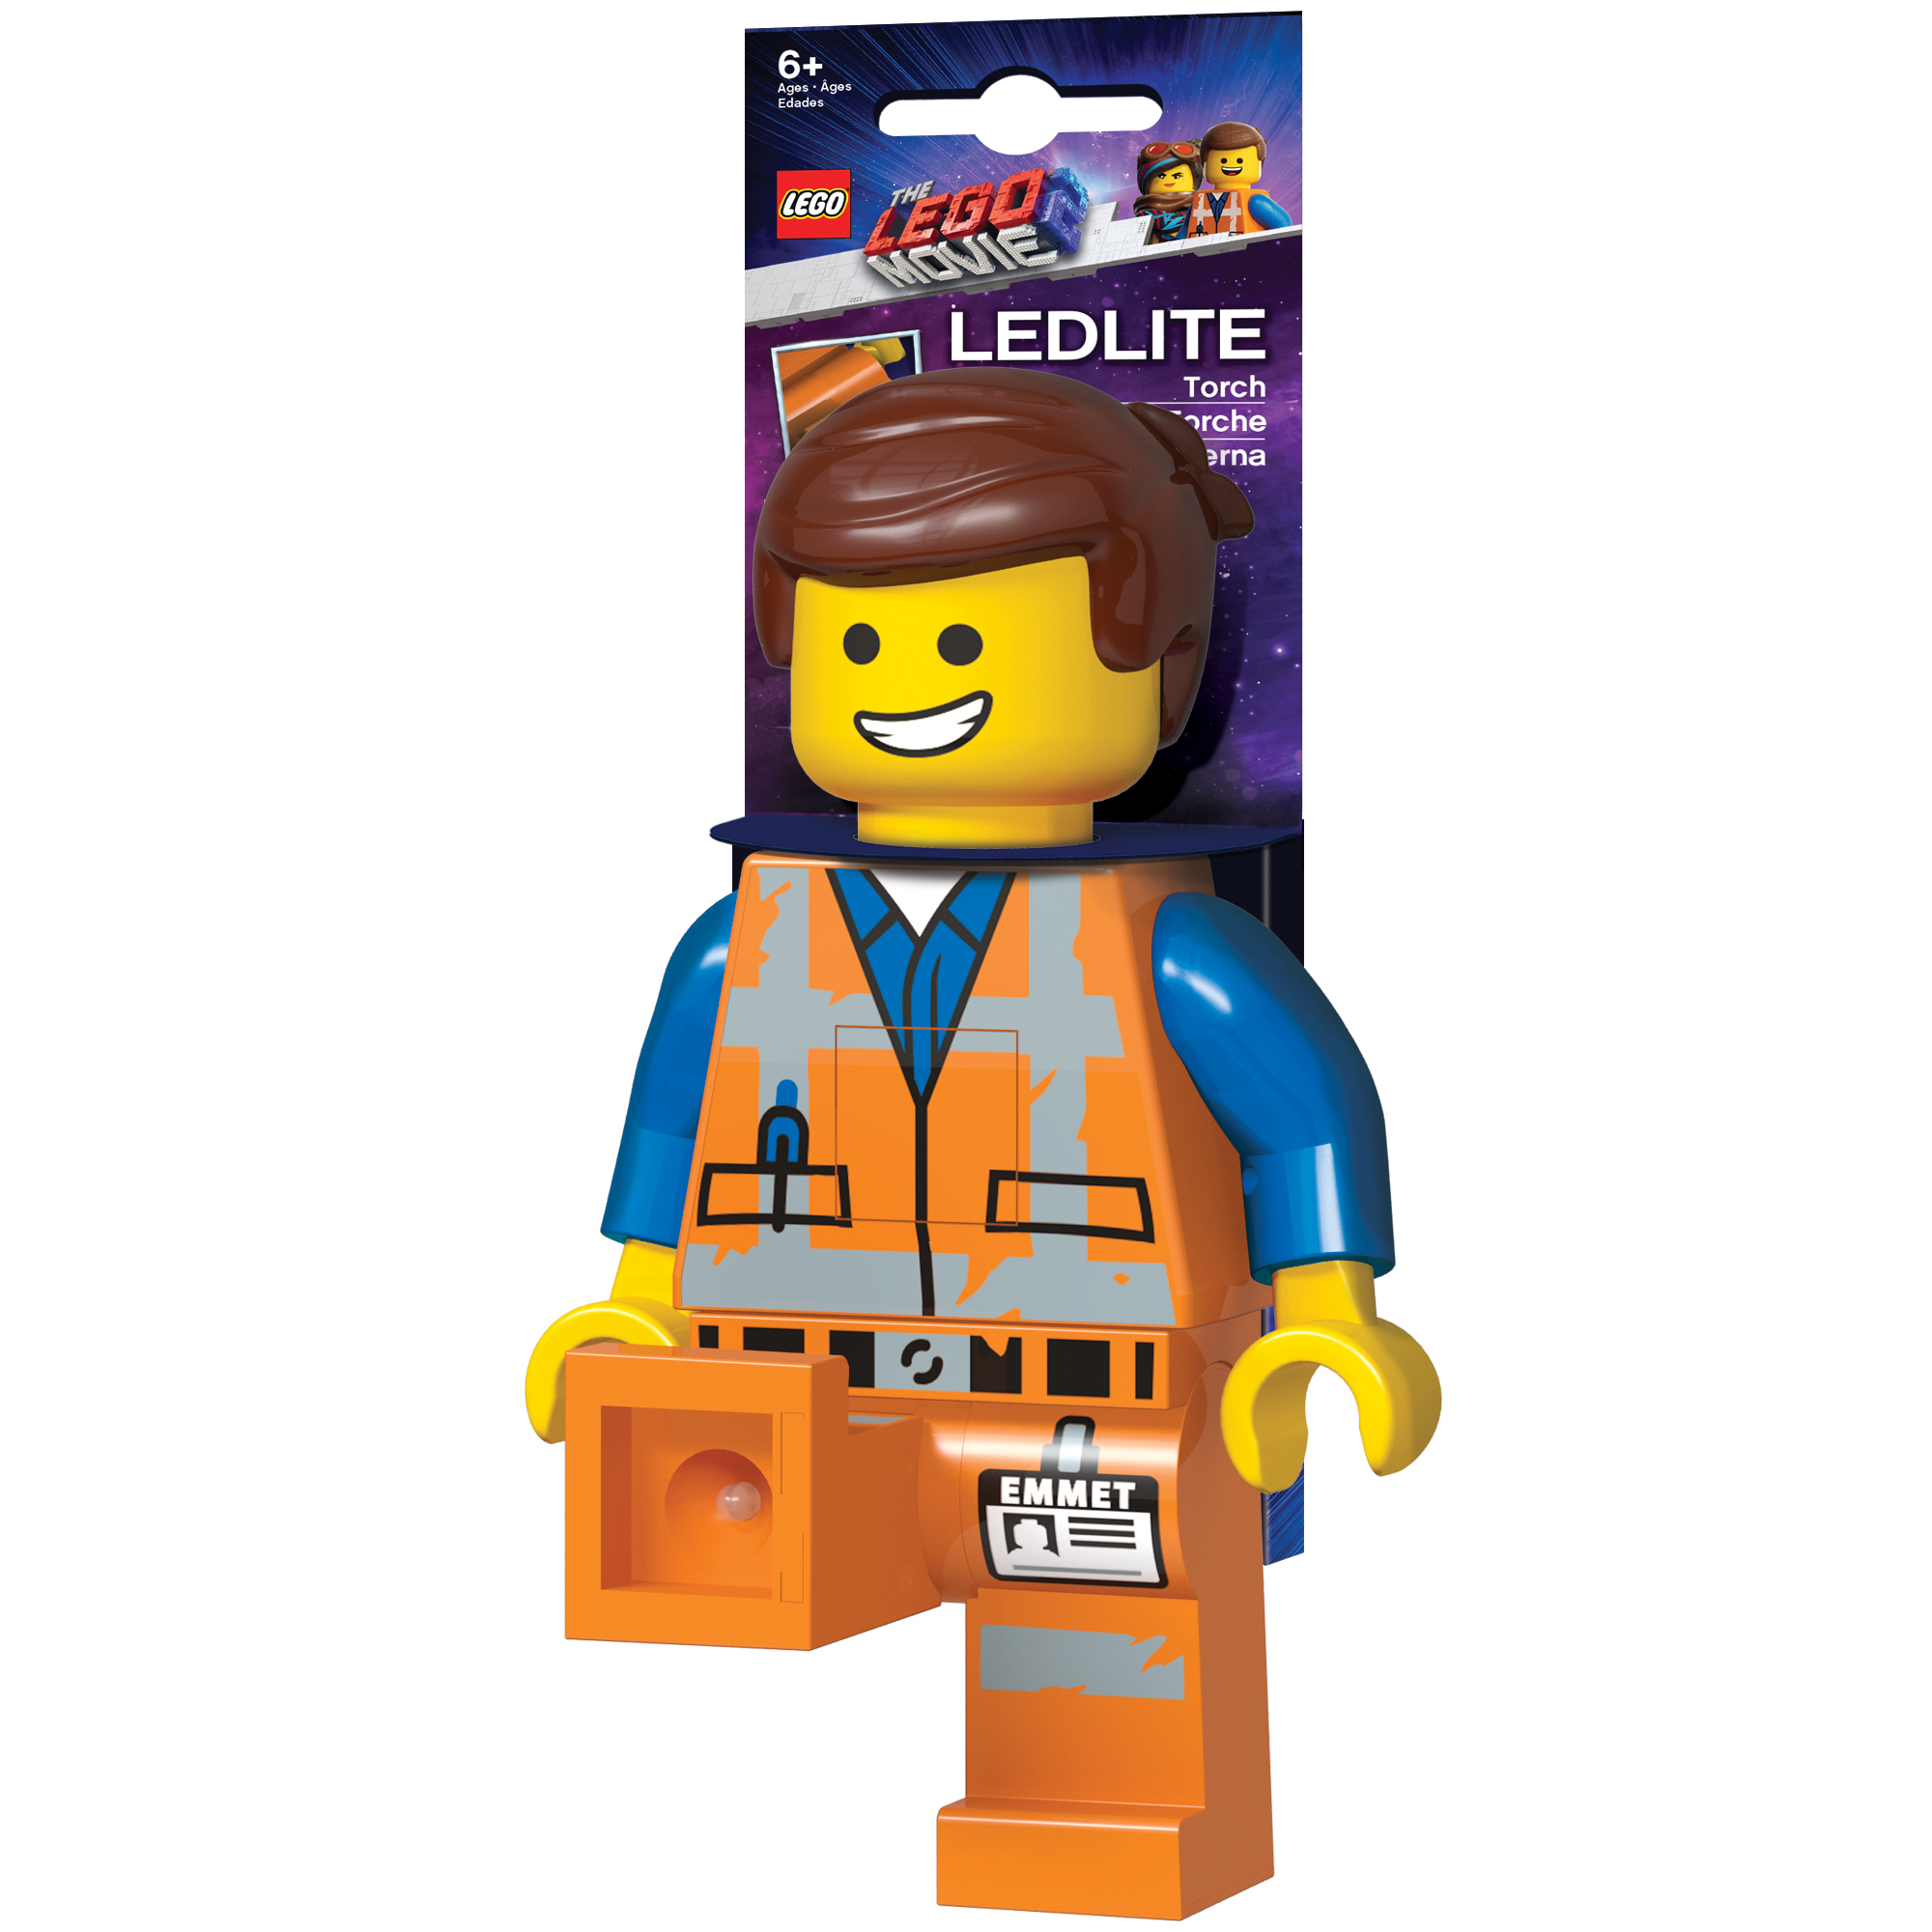 The LEGO Movie 2 Torch, Emmet - image 3 of 3